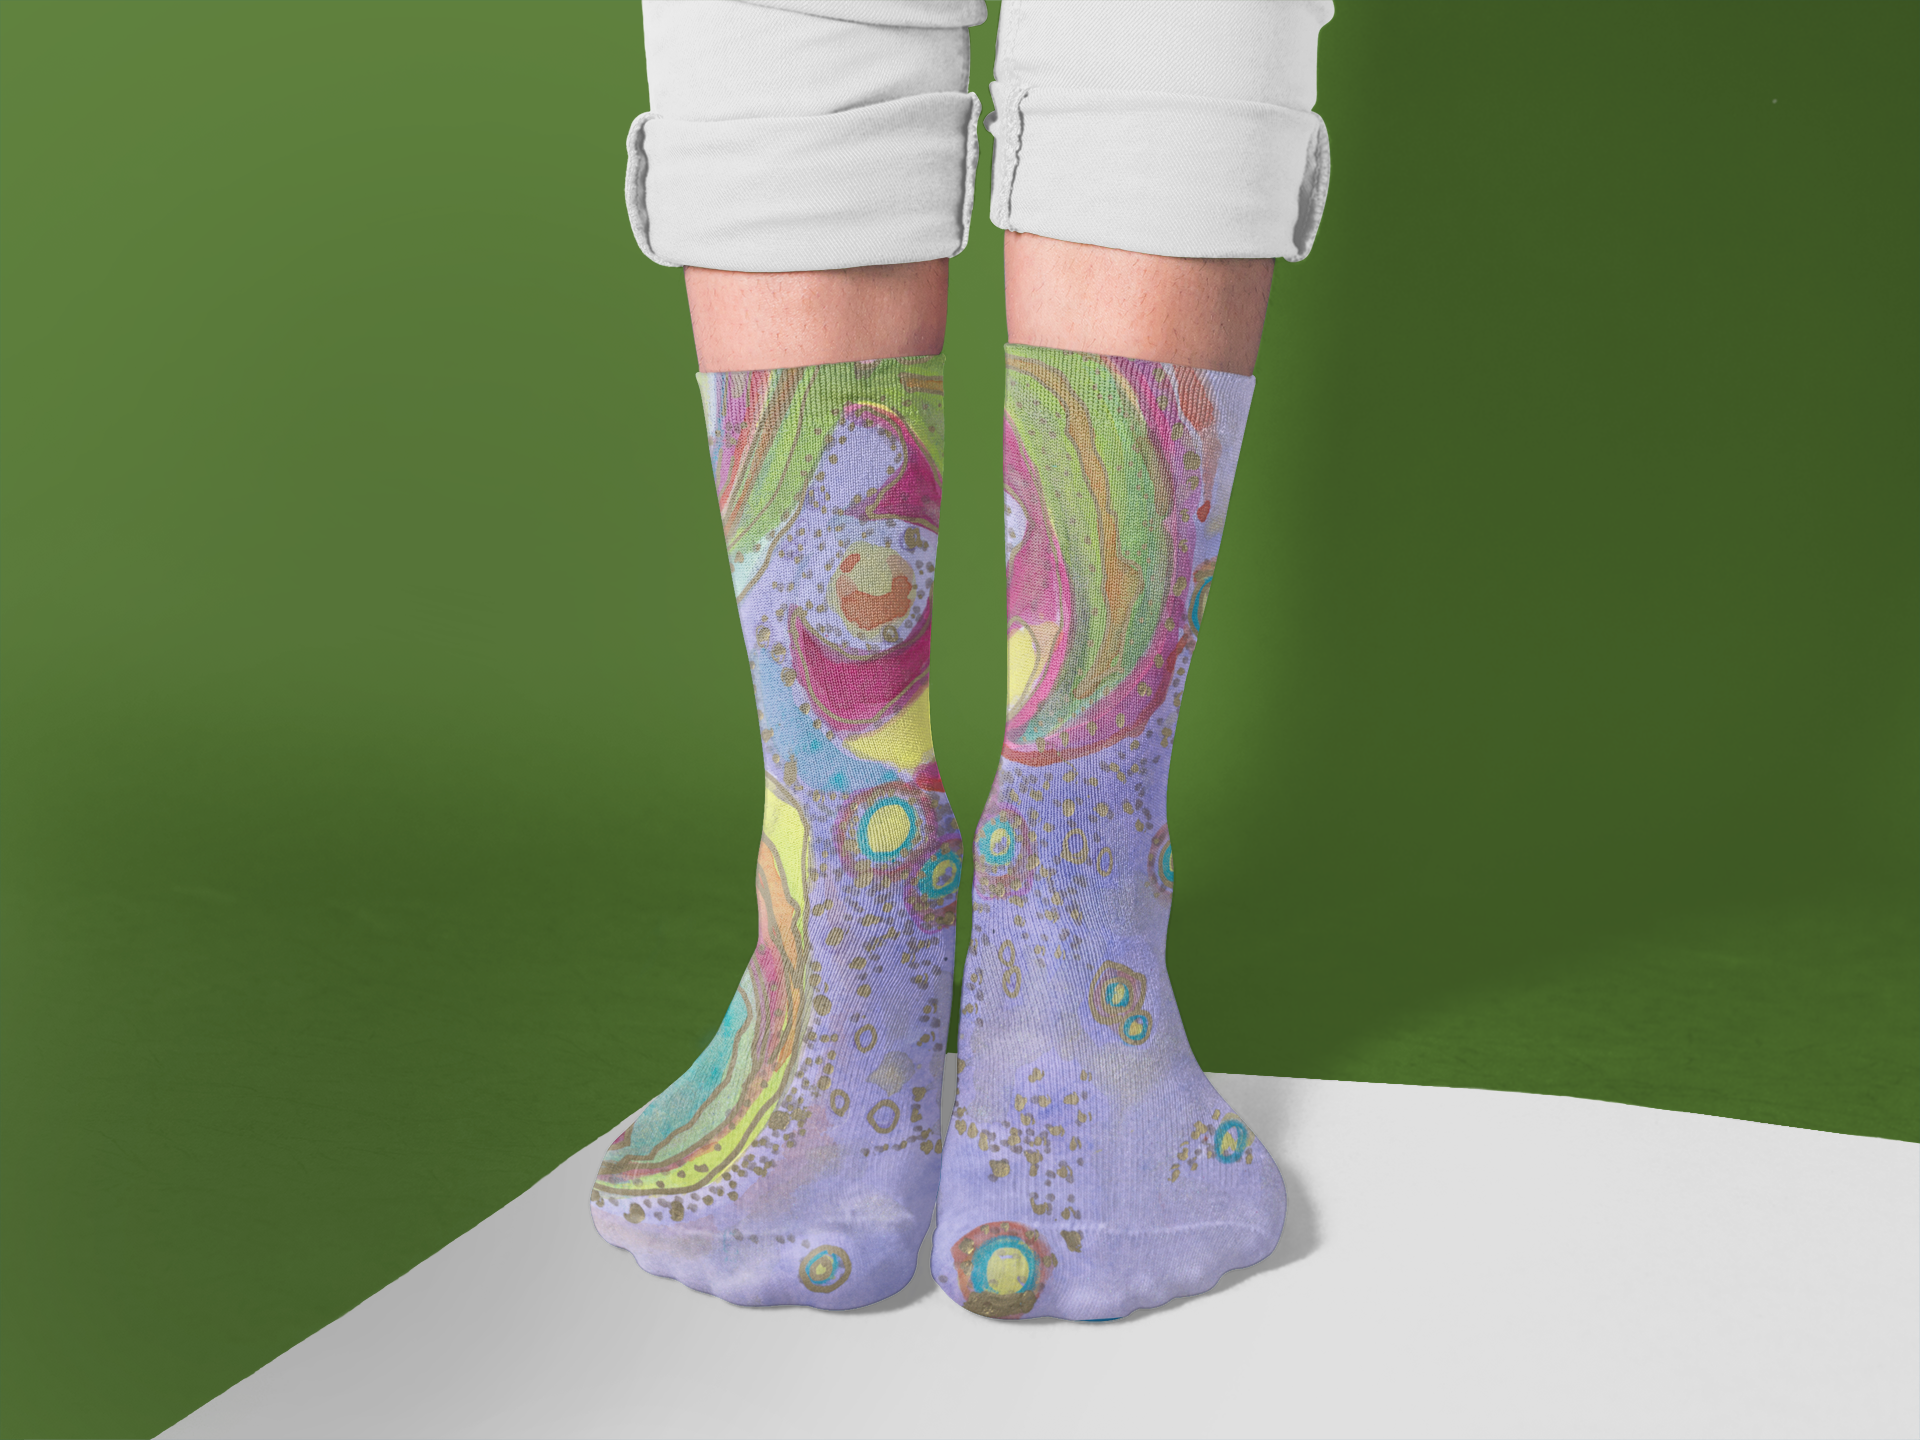 man-wearing-socks-template-while-standing-on-a-multicolor-surface-a15598-2.png